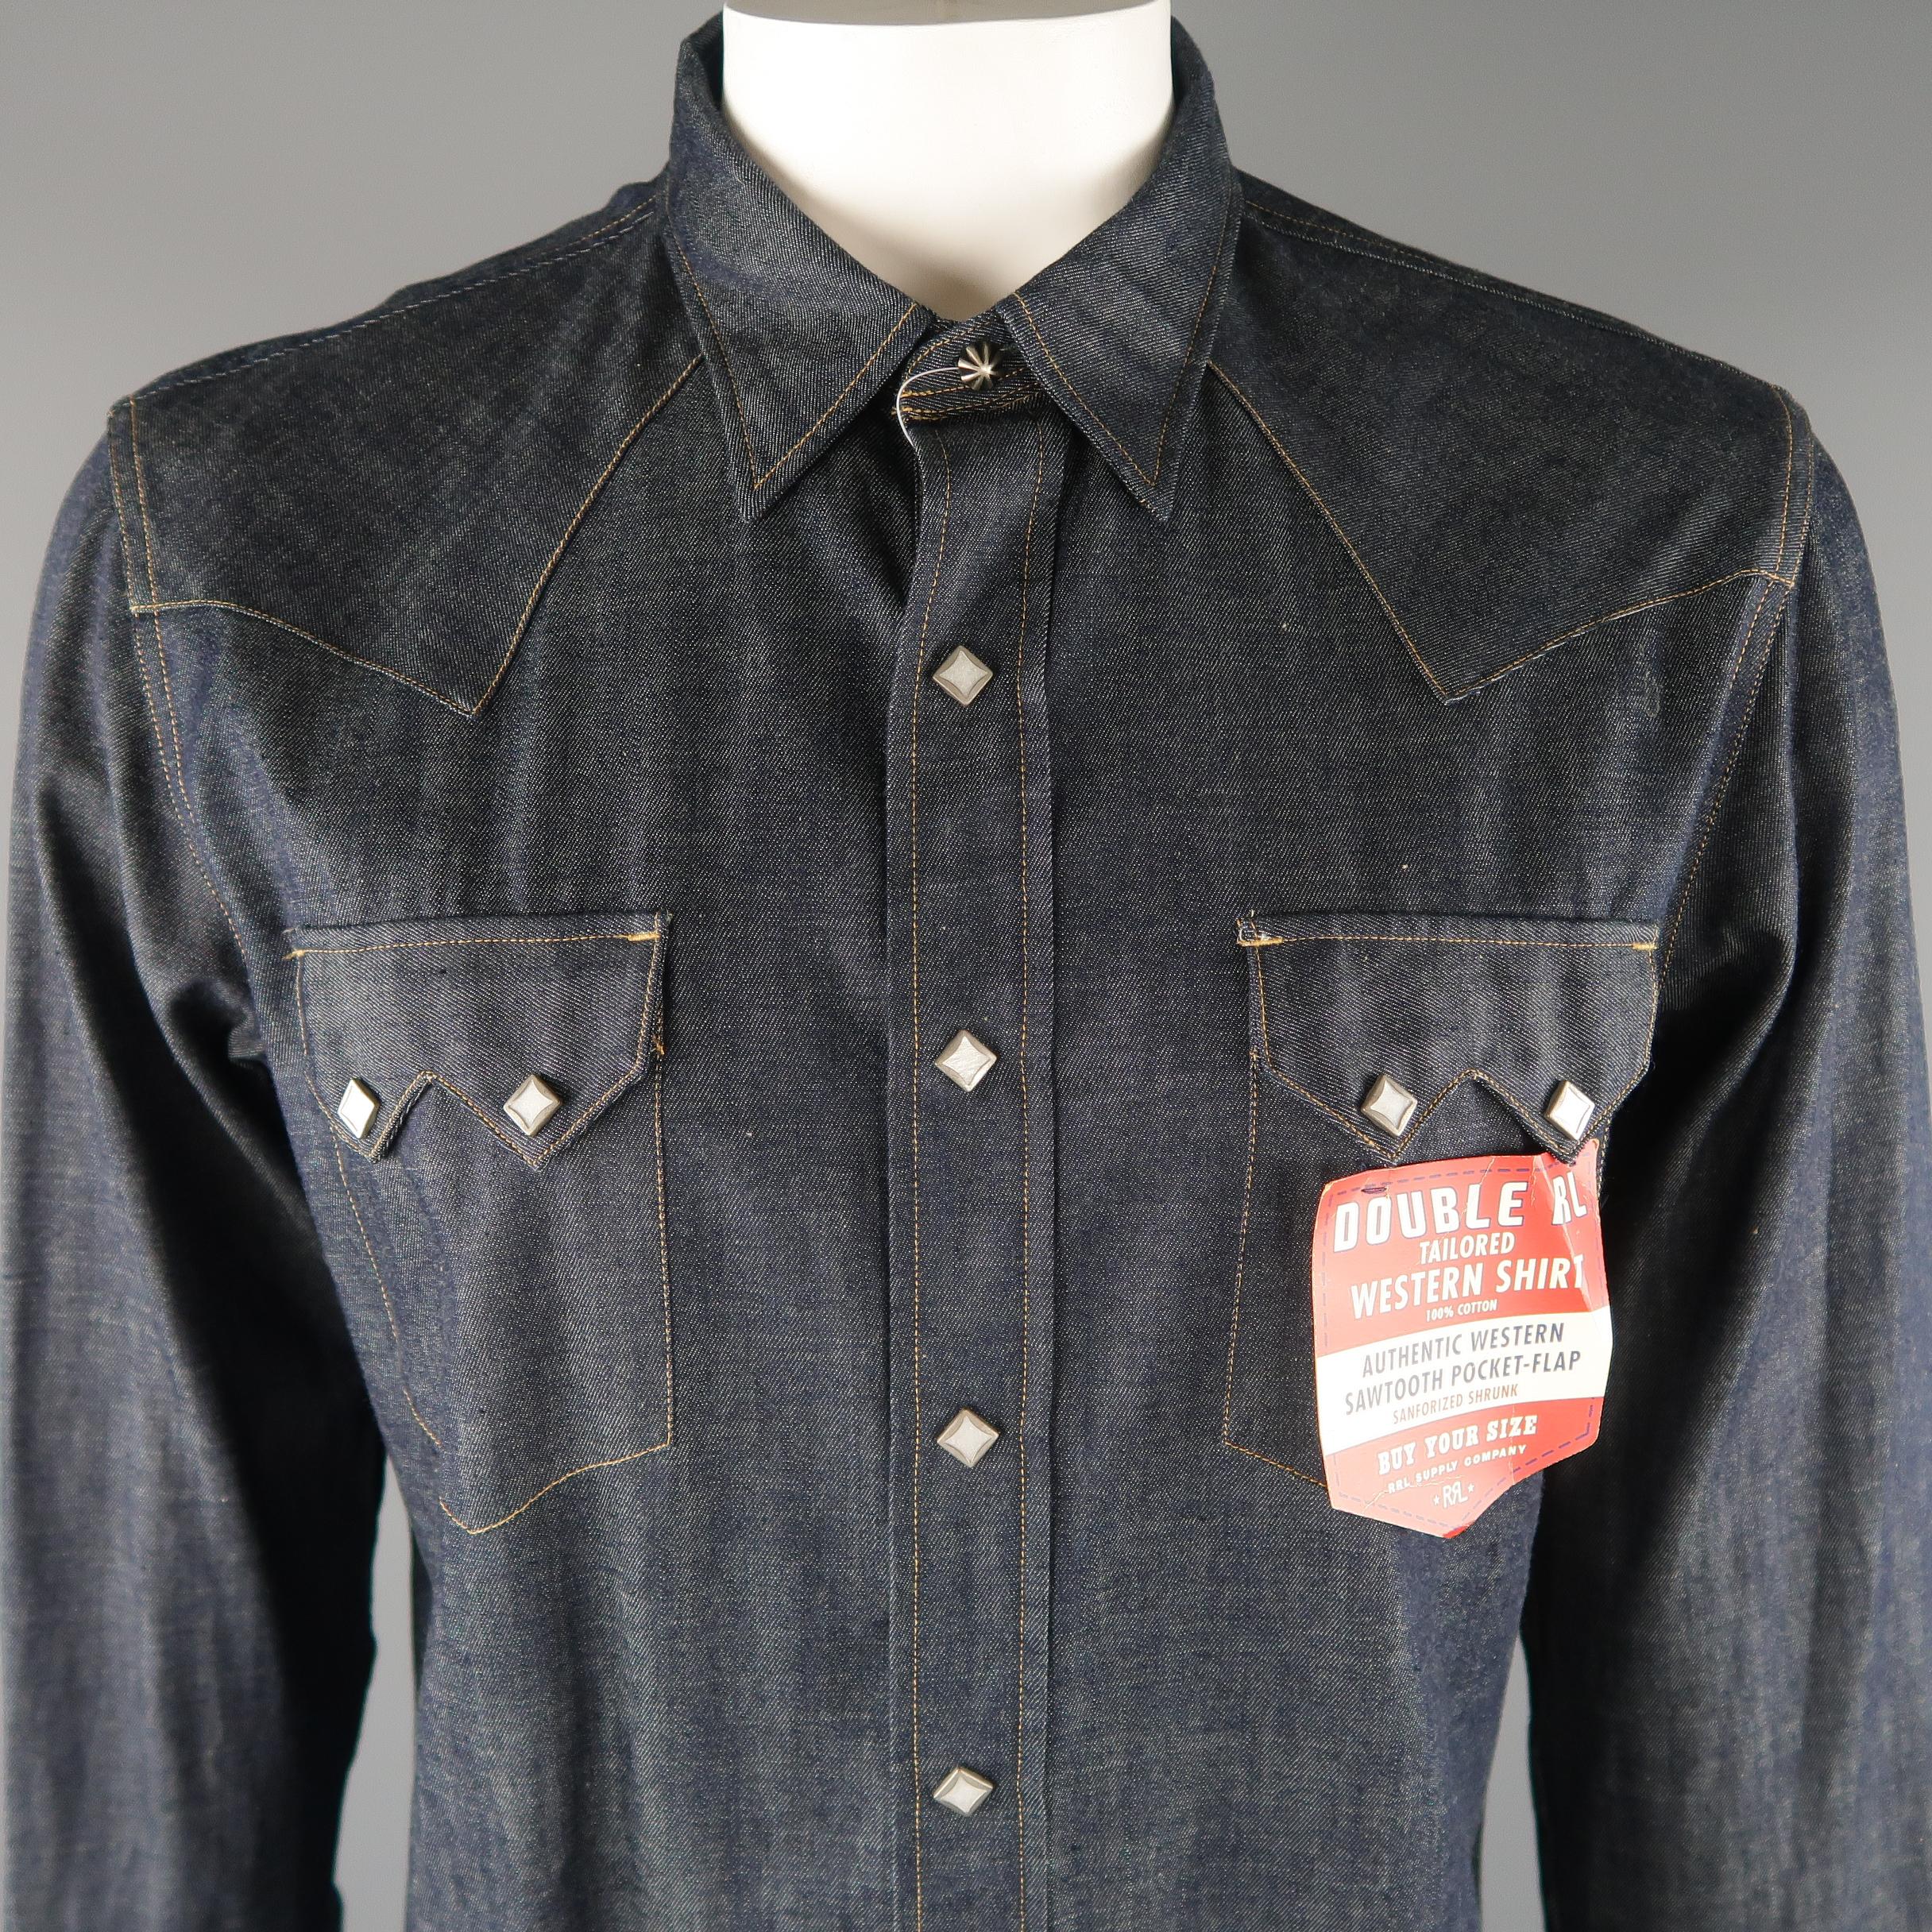 RRL by RALPH LAUREN long sleeve western shirt come in a indigo tone in cotton material, with a contrast stitch, front patch pockets, snaps, button up.
 
New with Tags.
Marked: L 17
 
Measurements:
 
Shoulder: 18  in.
Chest: 48  in.
Sleeve: 28.5 